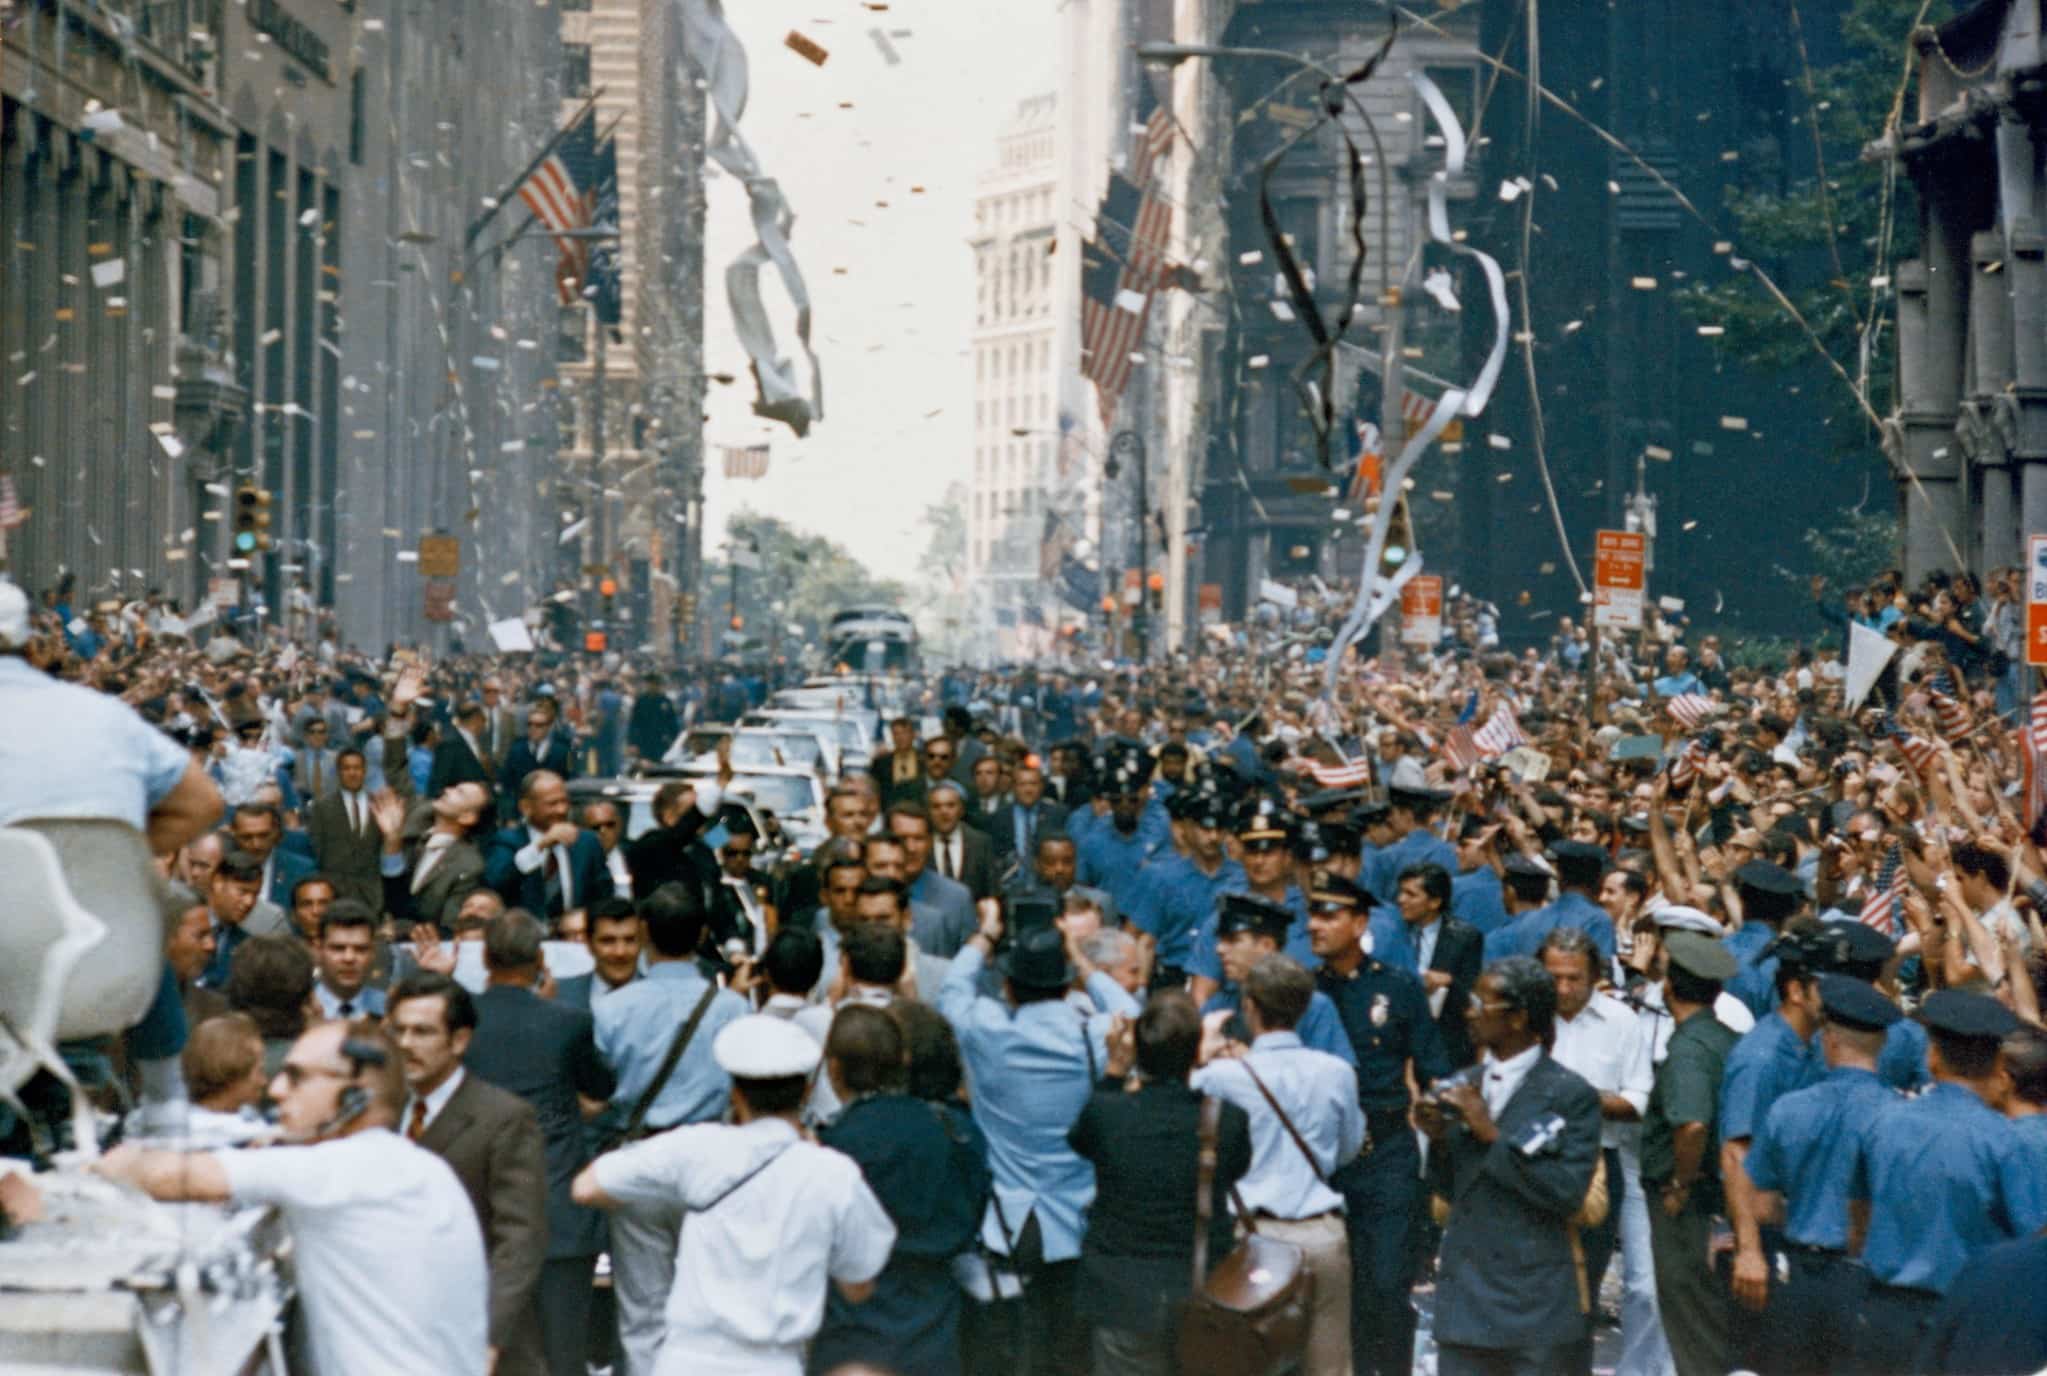 New York City welcomed the Apollo 11 crew with a ticker tape parade down Broadway and Park Avenue